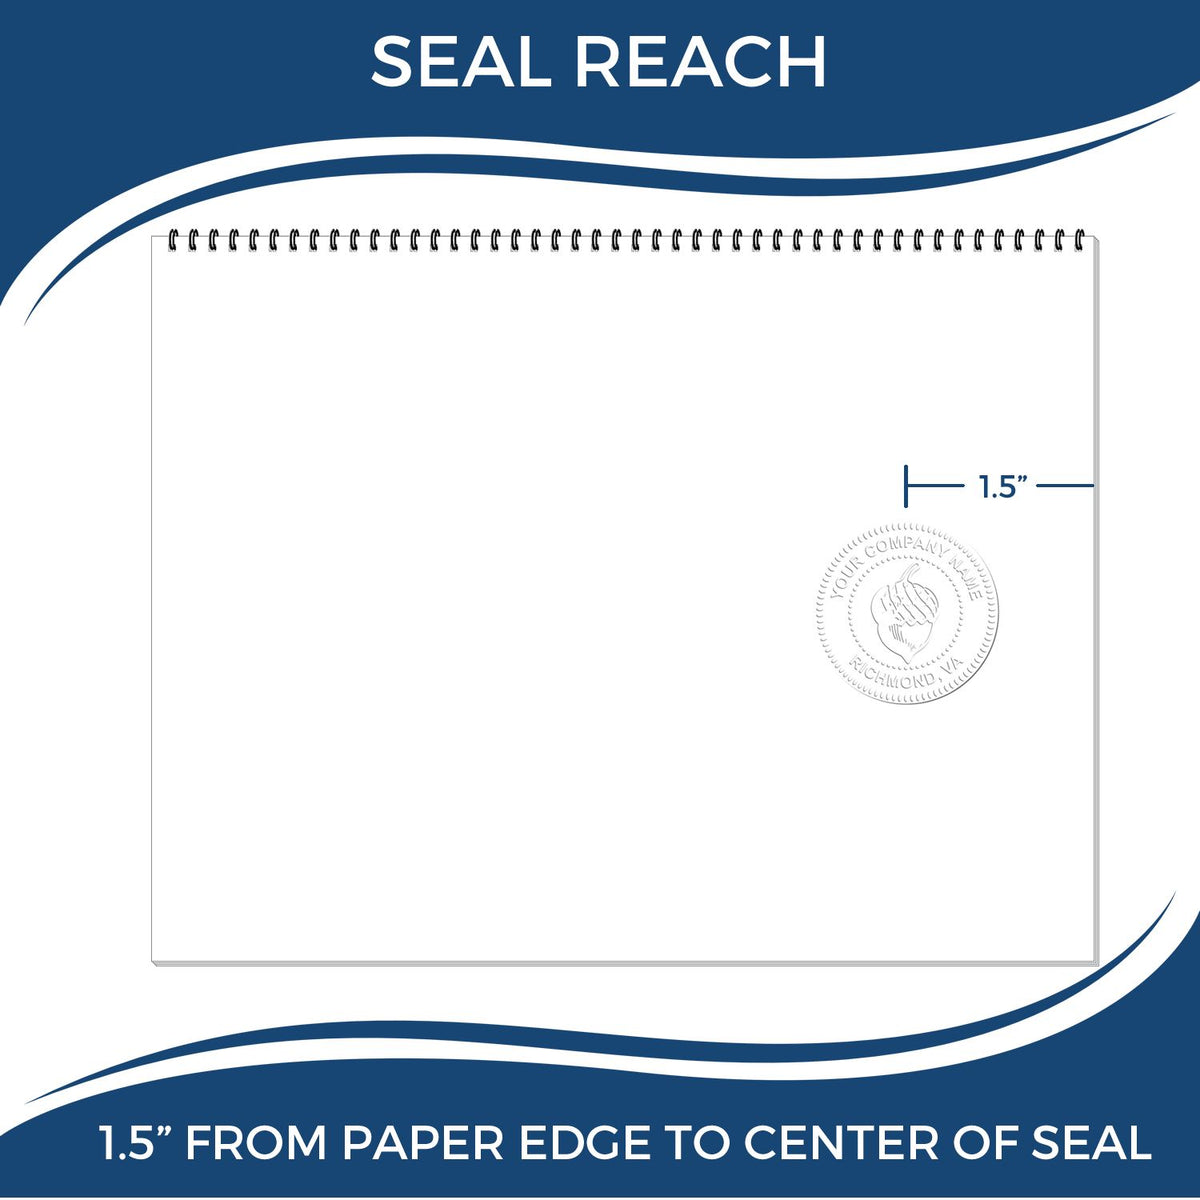 An infographic showing the seal reach which is represented by a ruler and a miniature seal image of the Hybrid Kentucky Architect Seal